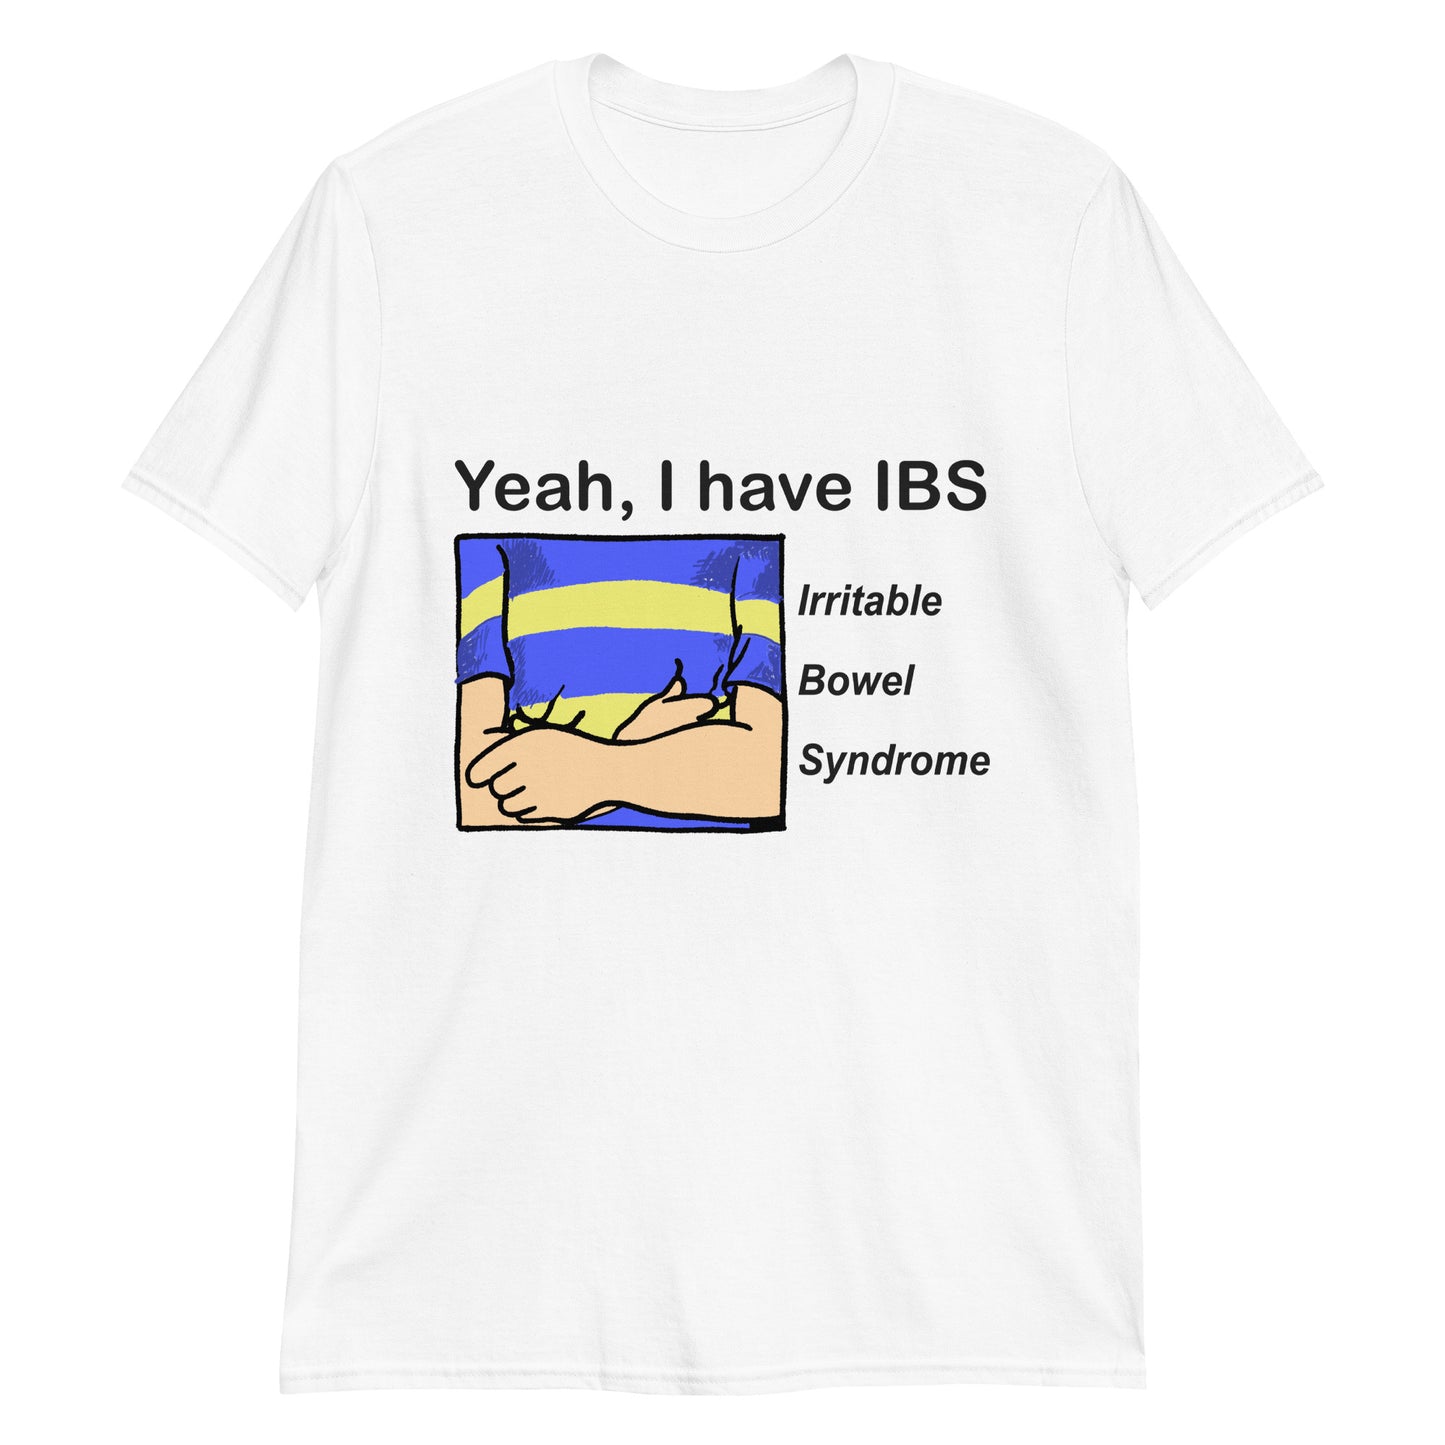 Yeah, i have ibs.